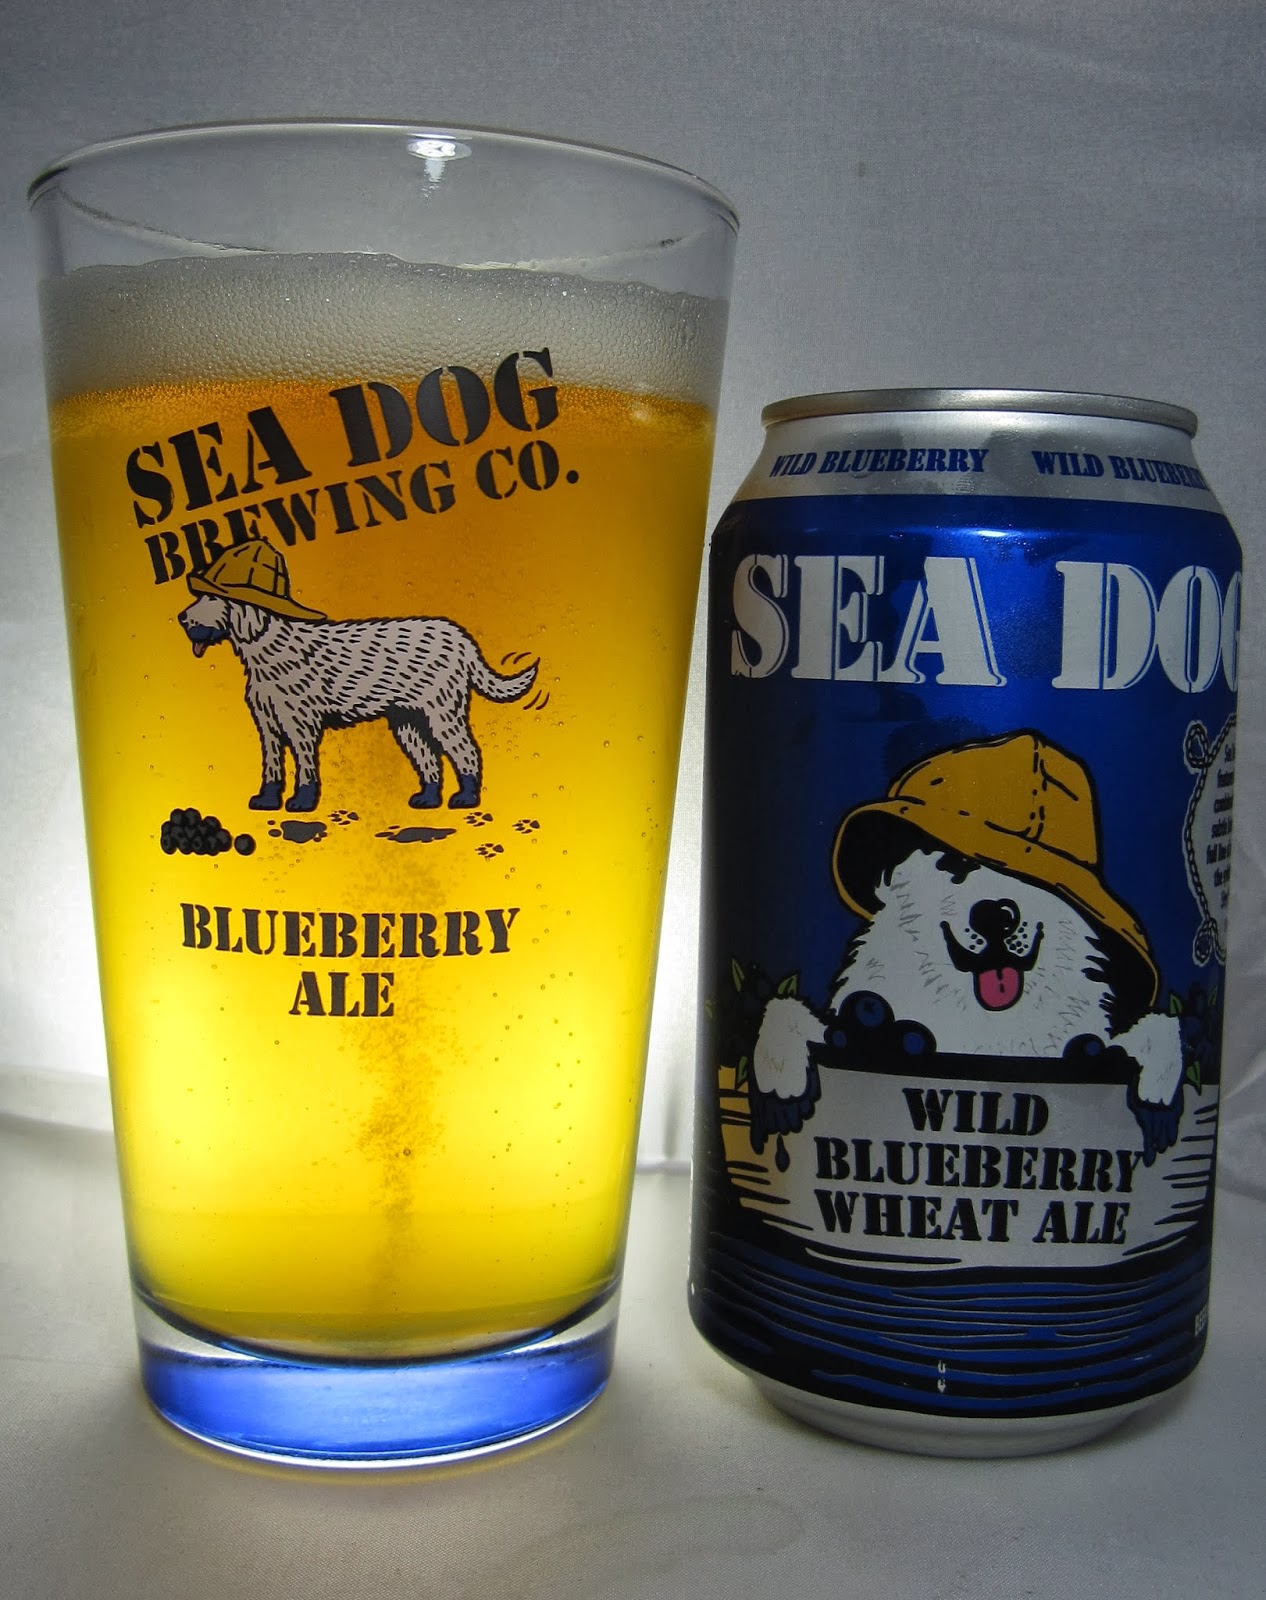 Chad'z Beer Reviews: Sea Dog Wild Blueberry Wheat Ale